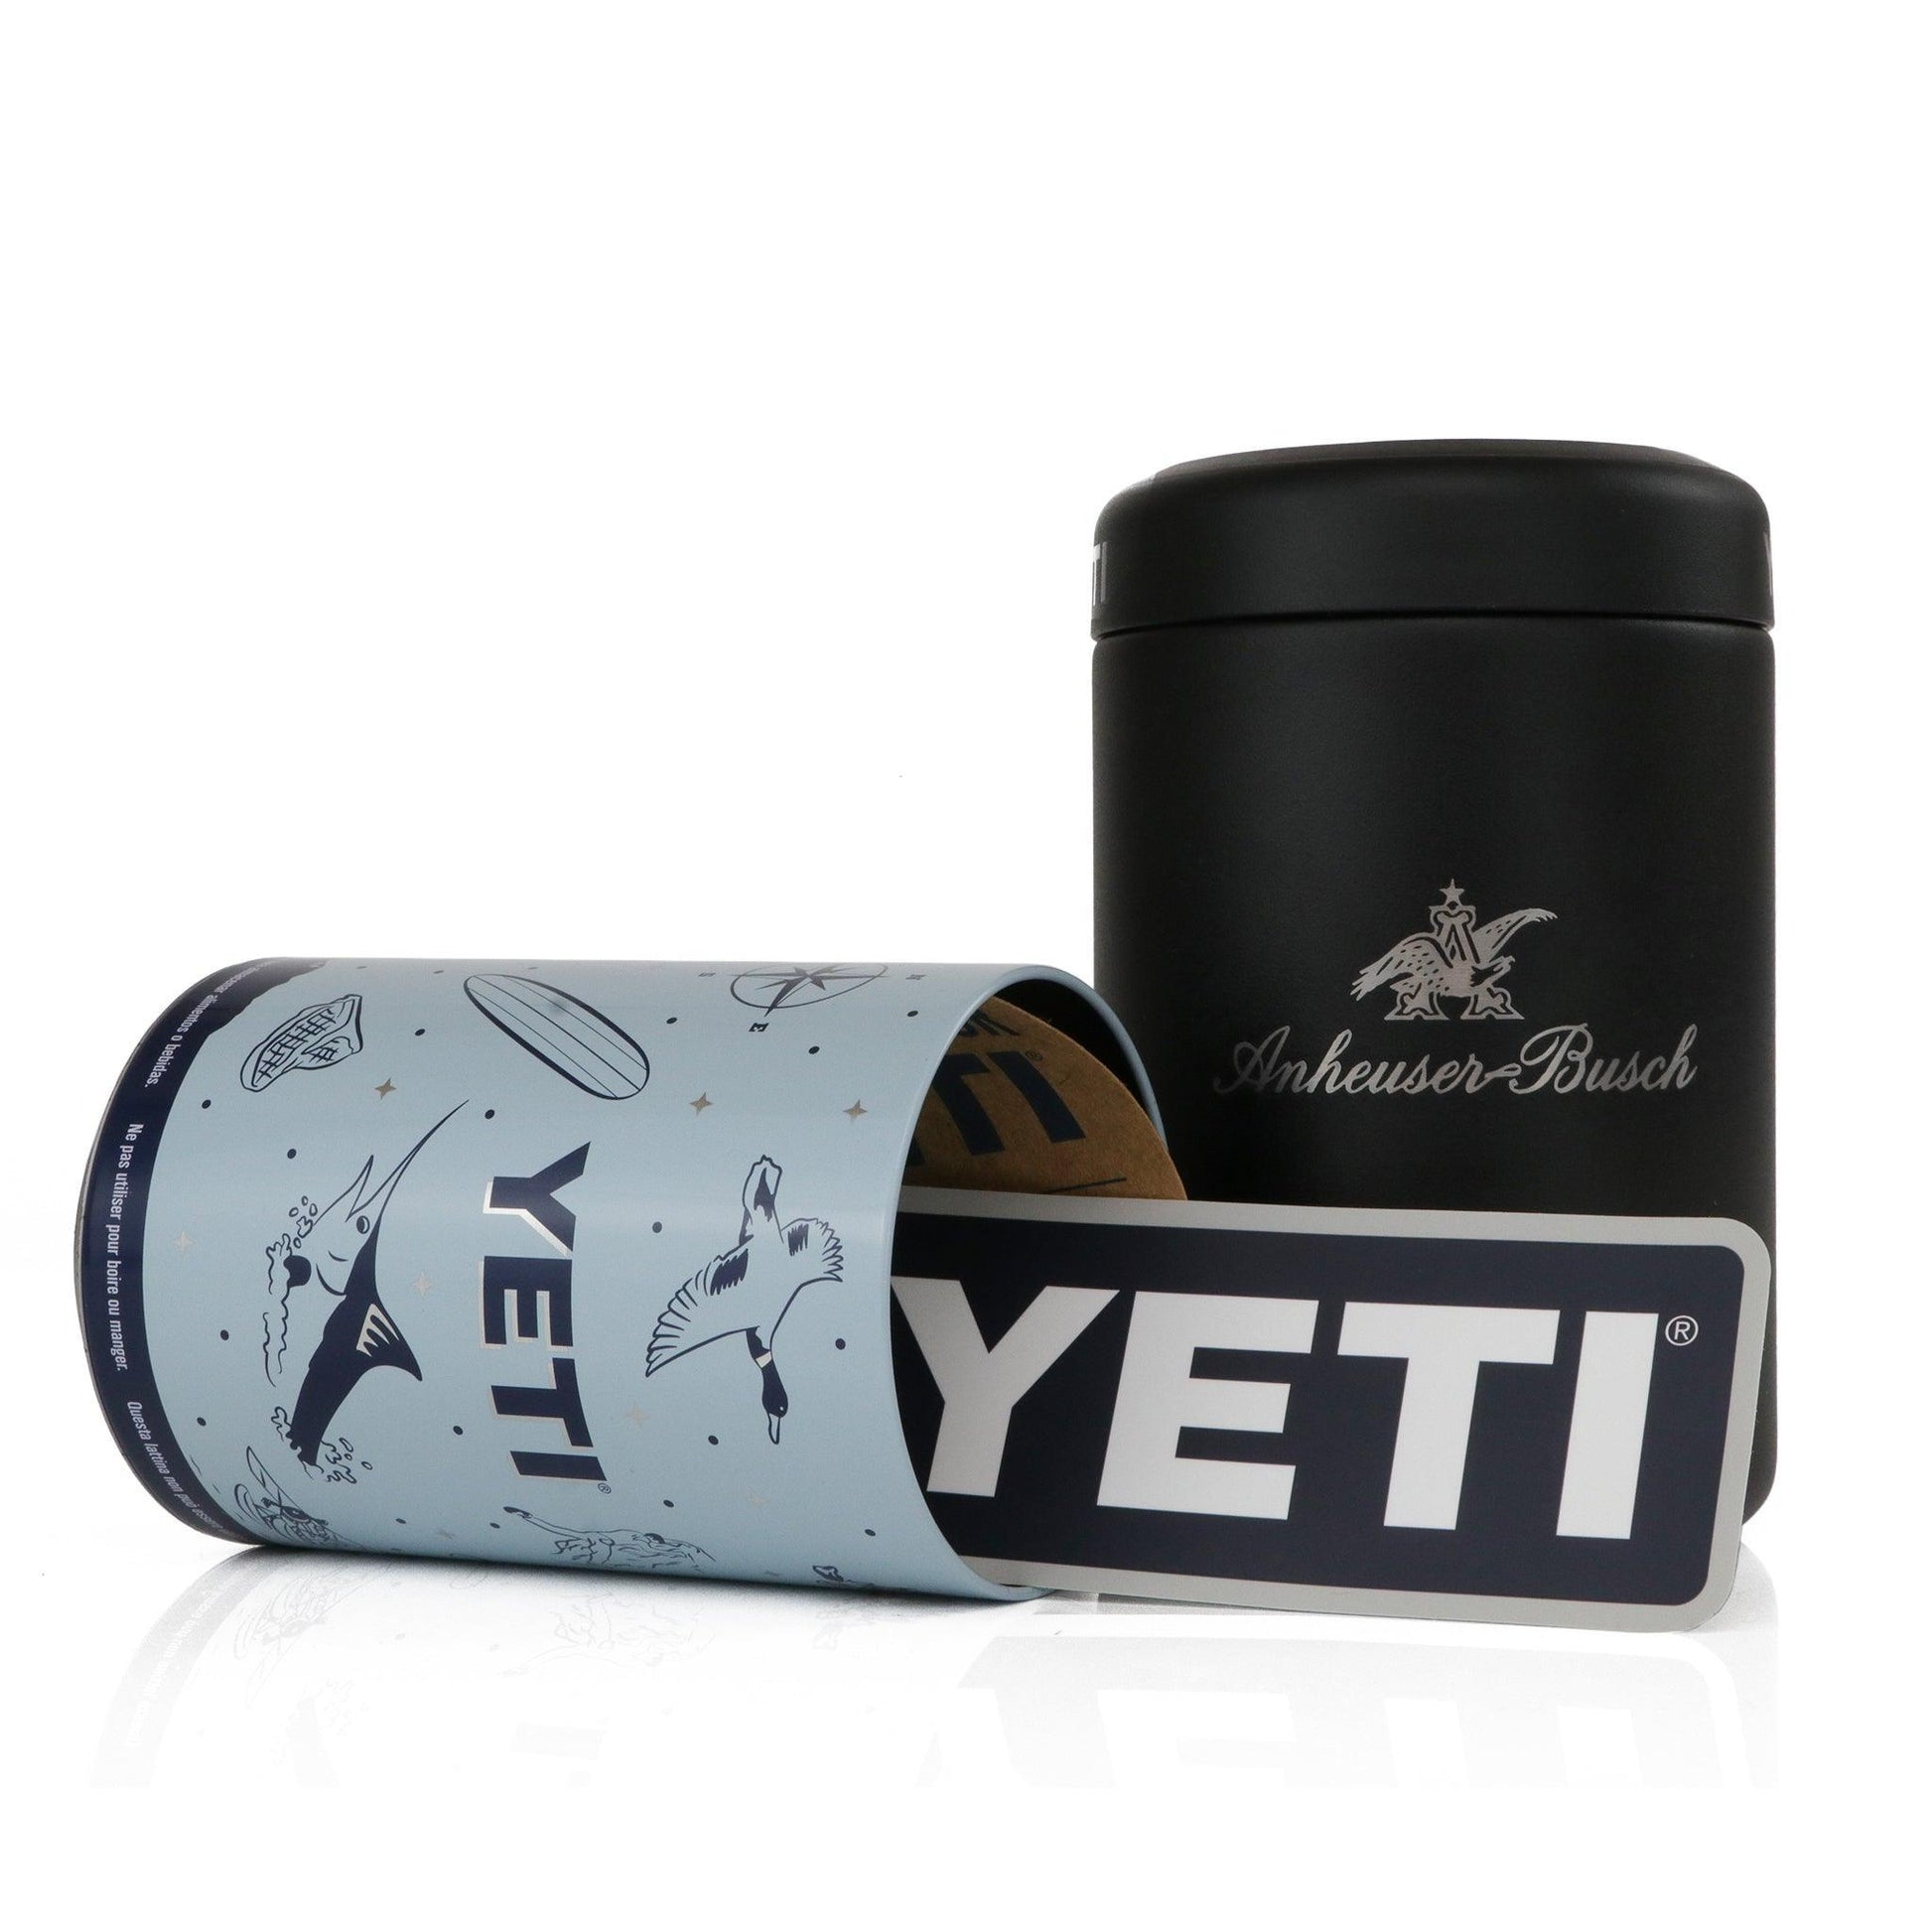 Anheuser-Busch 12oz Yeti Can Colster - Inserts